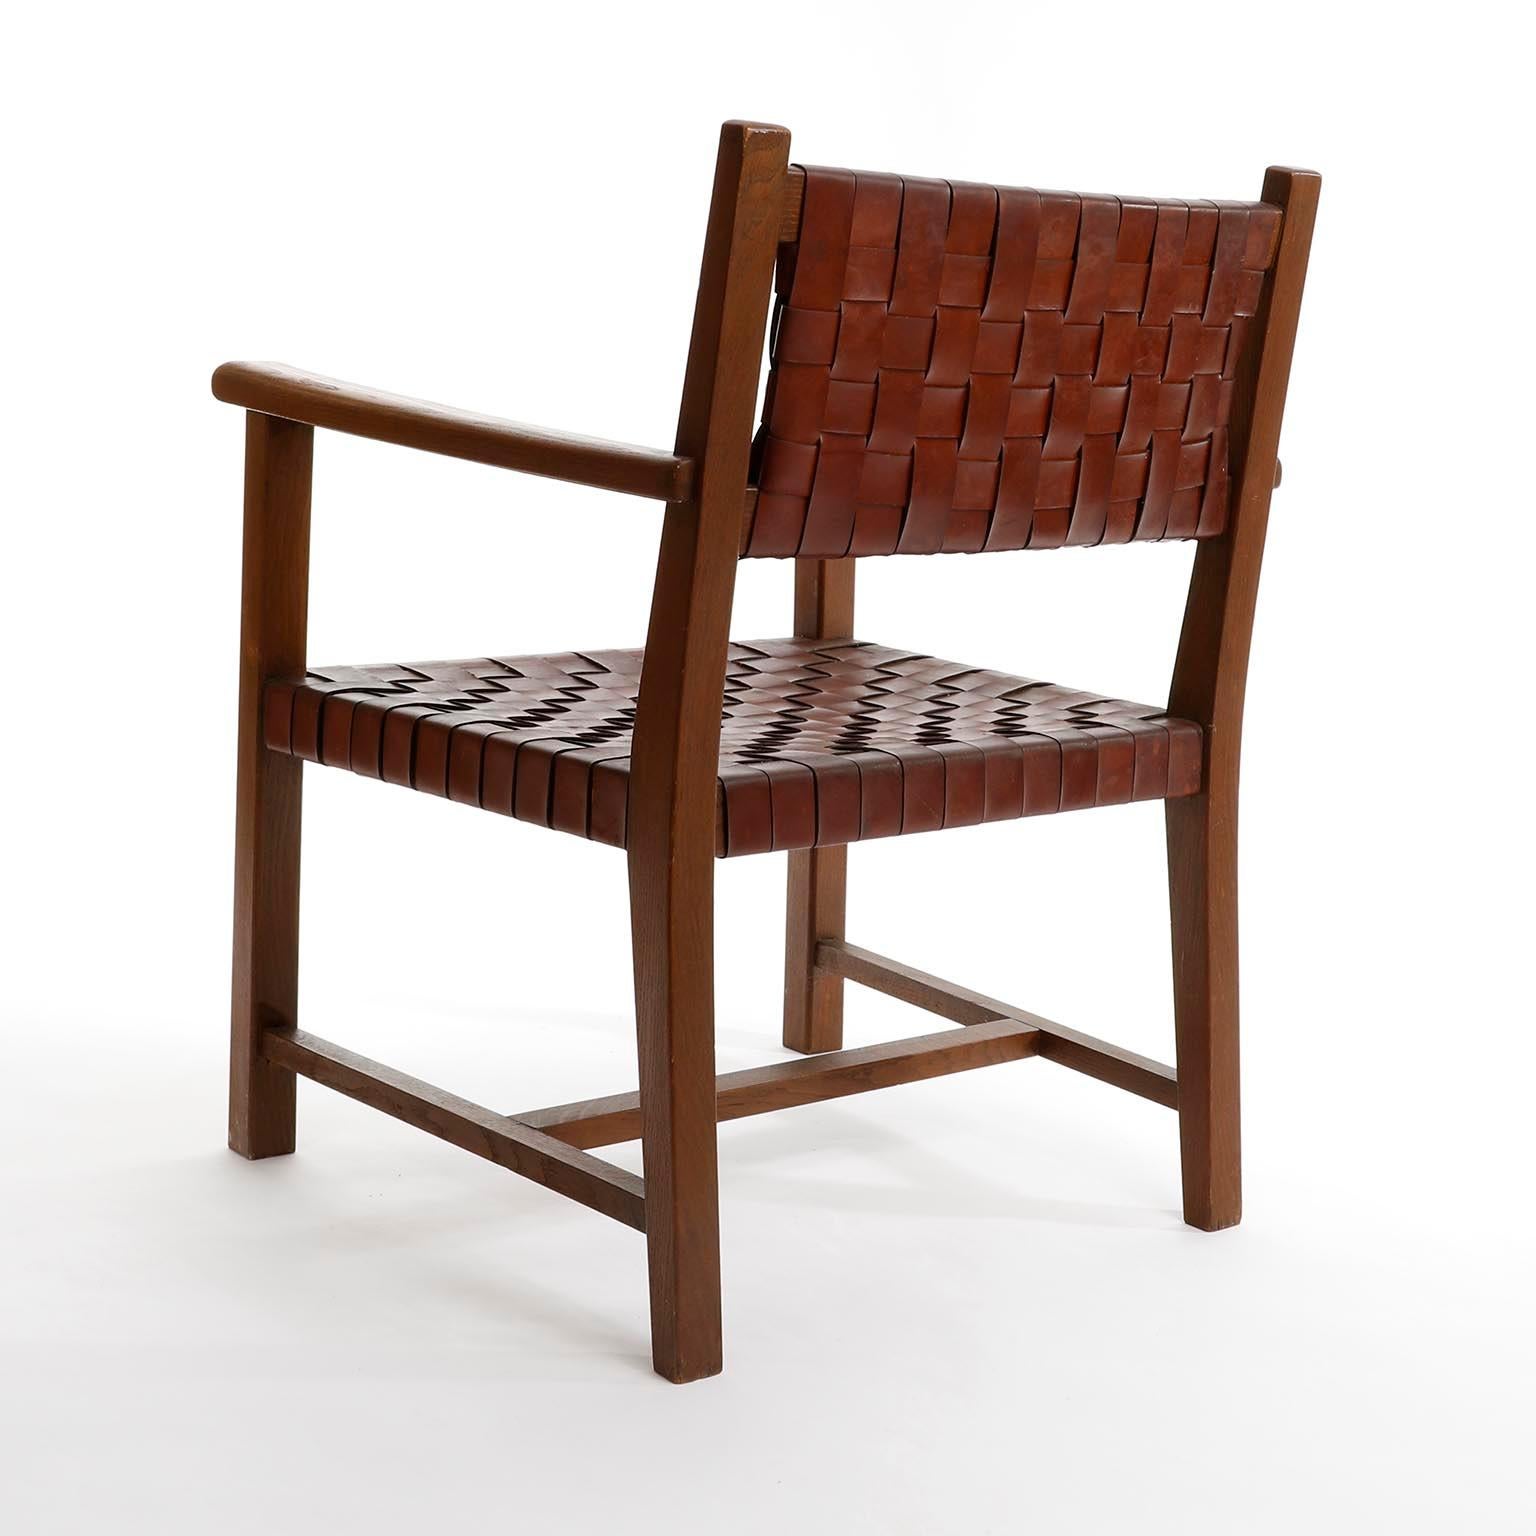 Mid-20th Century Armchair in Cognac Brown Patinated Braided Leather and Oak, 1960s For Sale